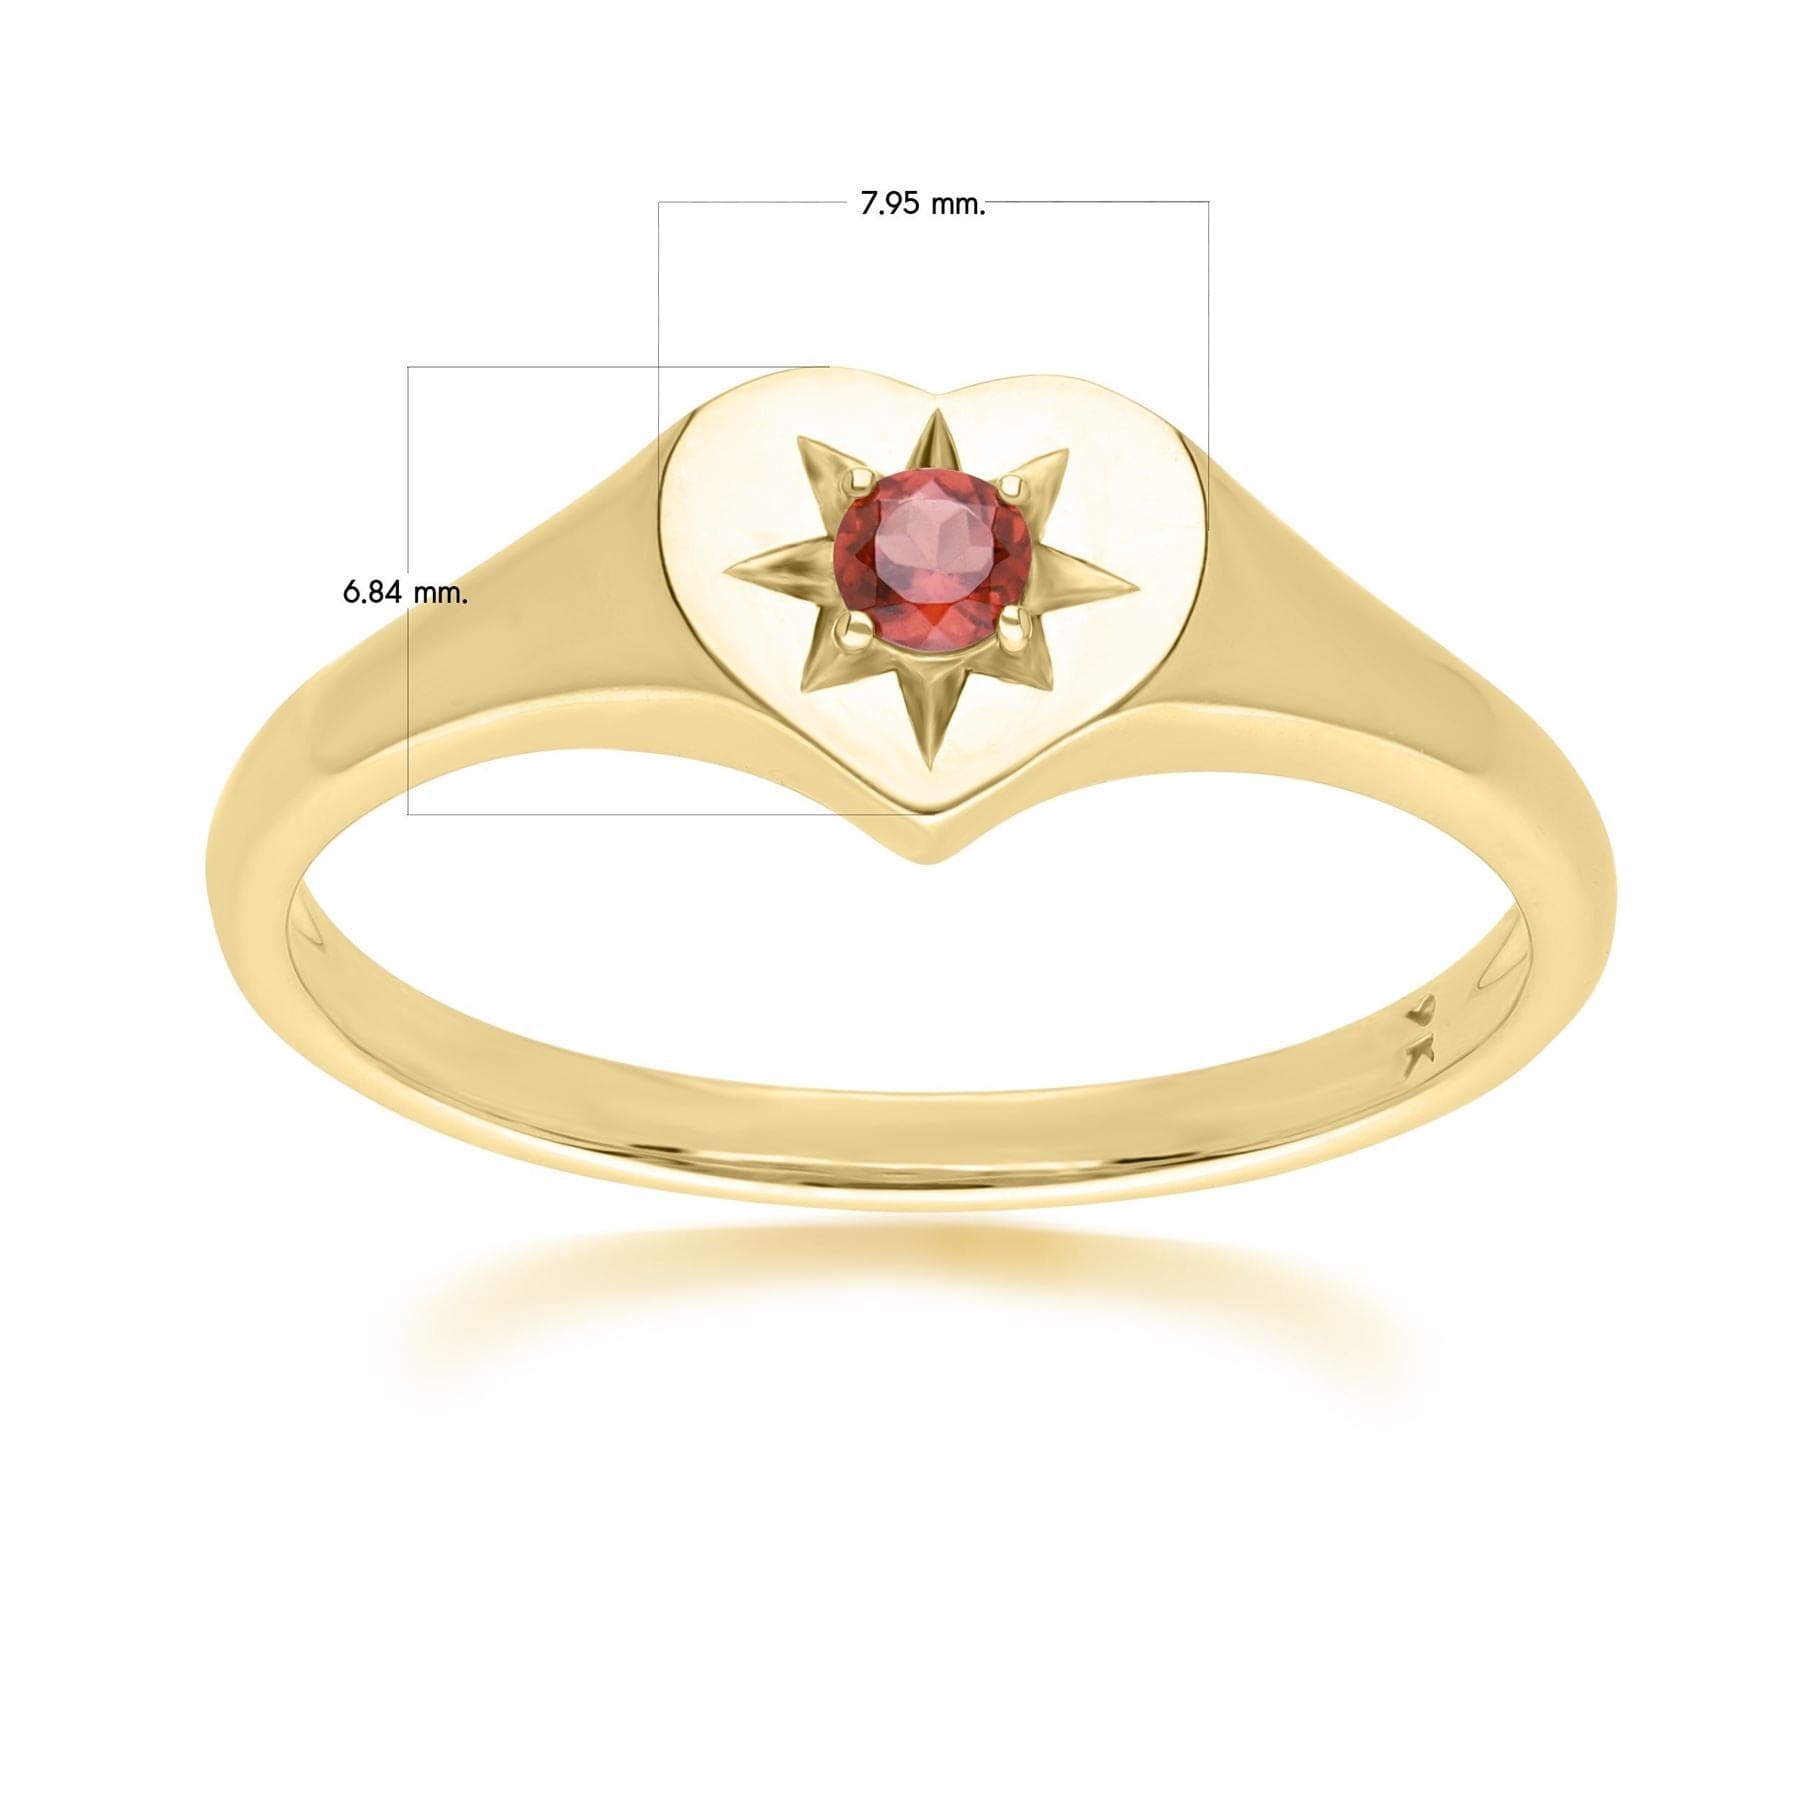 135R2055059_ ECFEW™ 'The Liberator' Garnet Heart Ring in 9ct Yellow Gold Dimensions